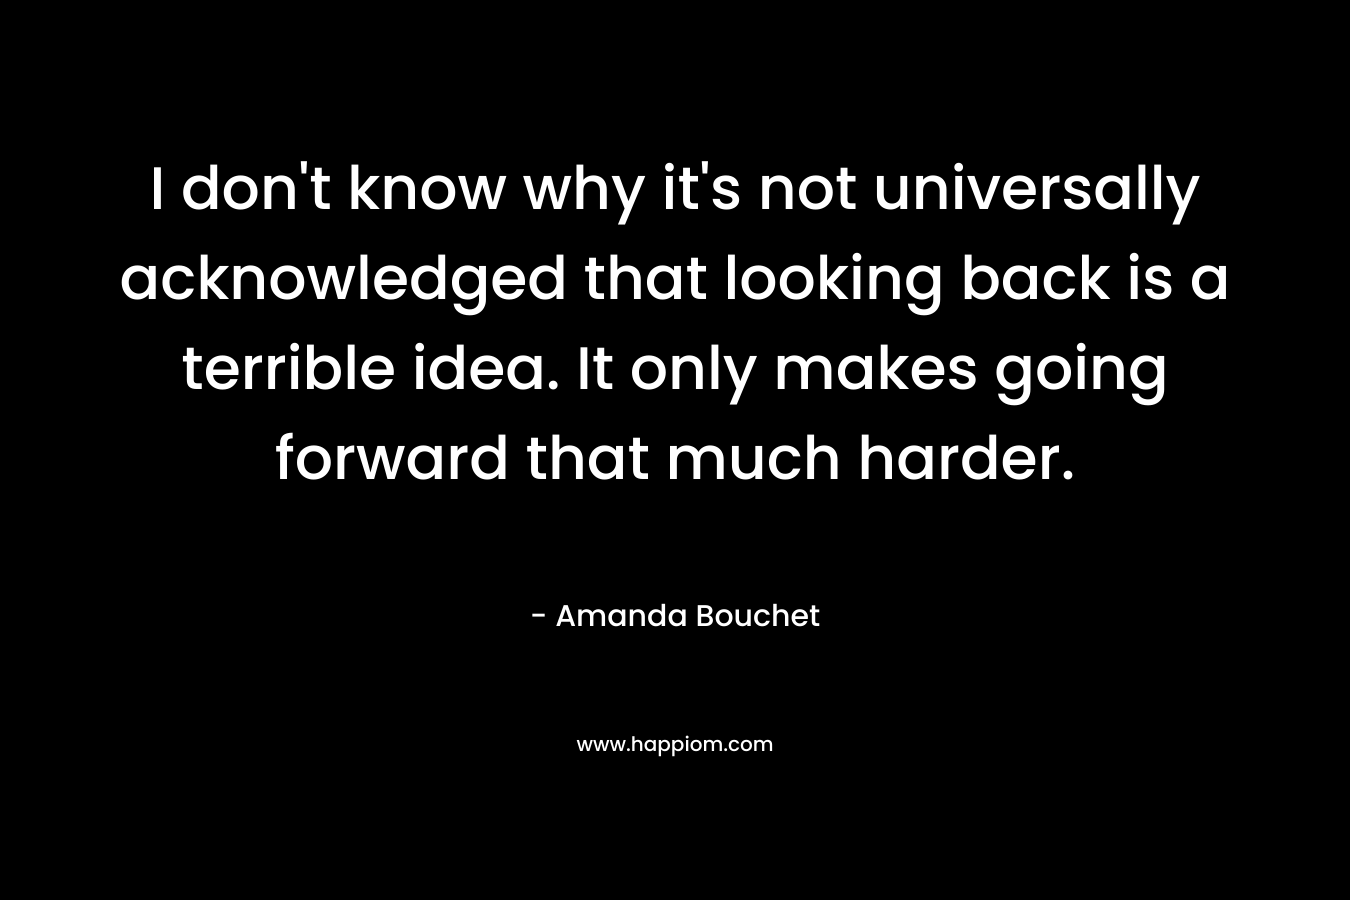 I don’t know why it’s not universally acknowledged that looking back is a terrible idea. It only makes going forward that much harder. – Amanda Bouchet